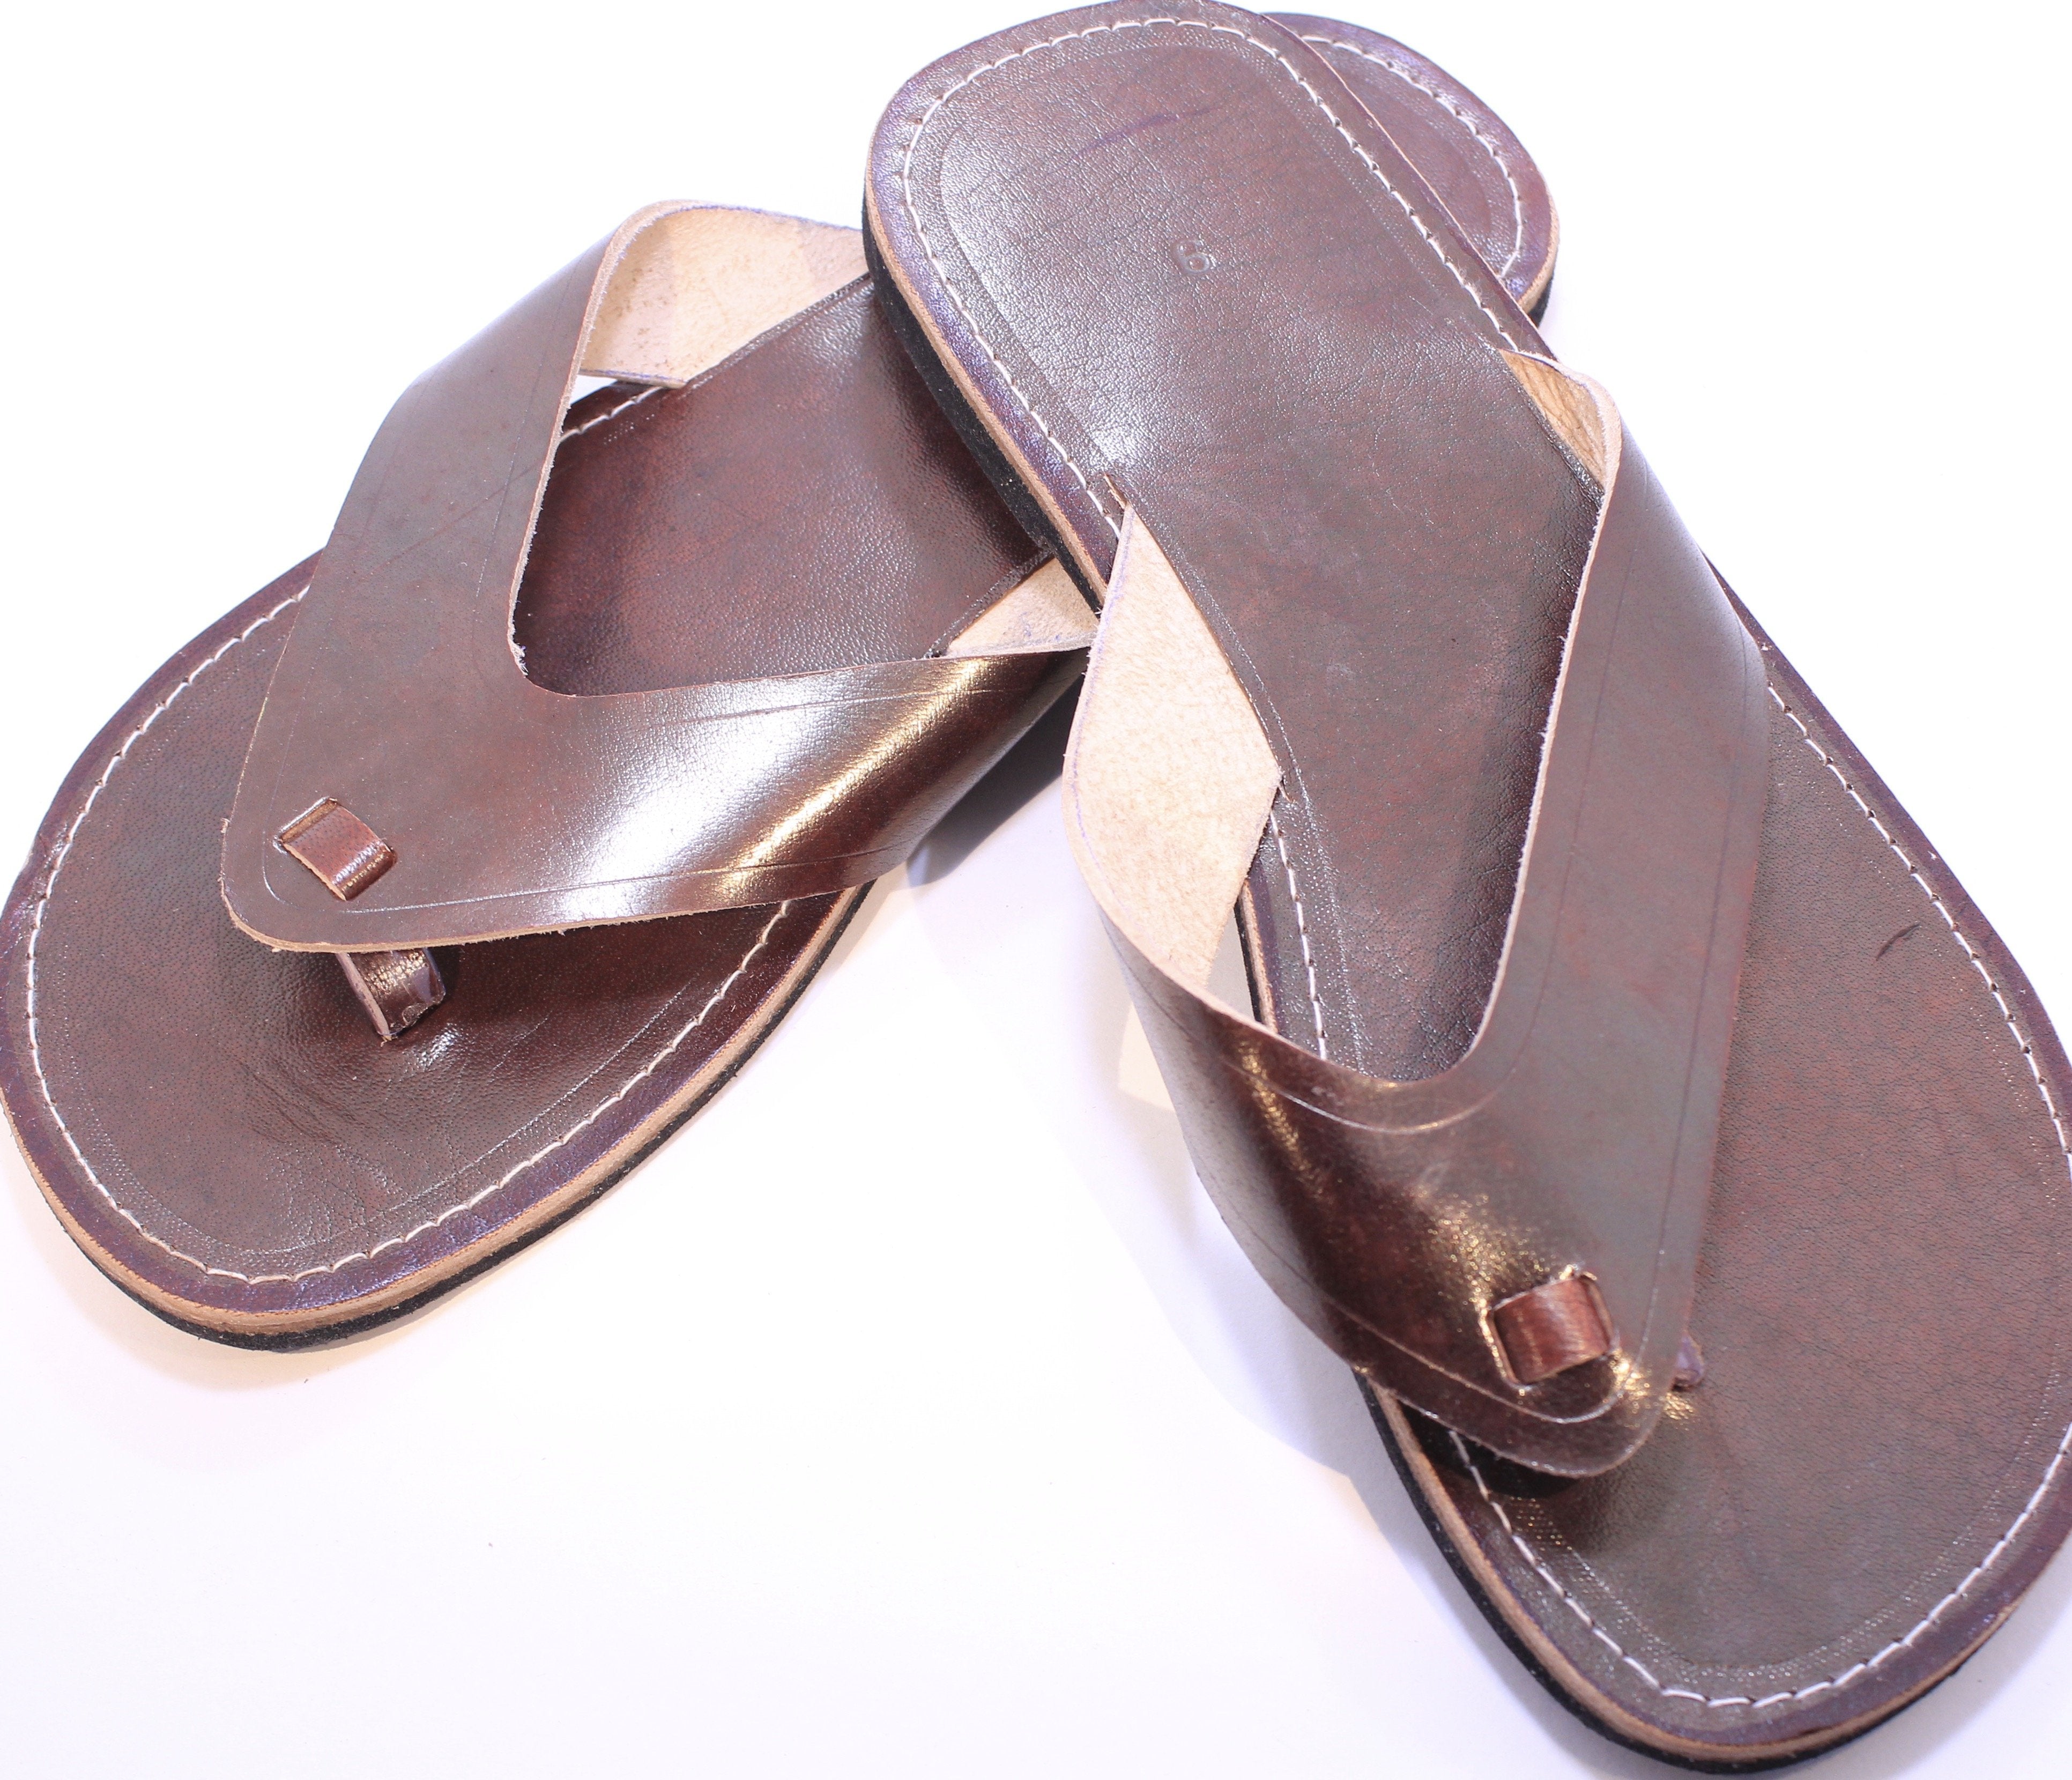 Buy leather sandals for men red tape in India @ Limeroad